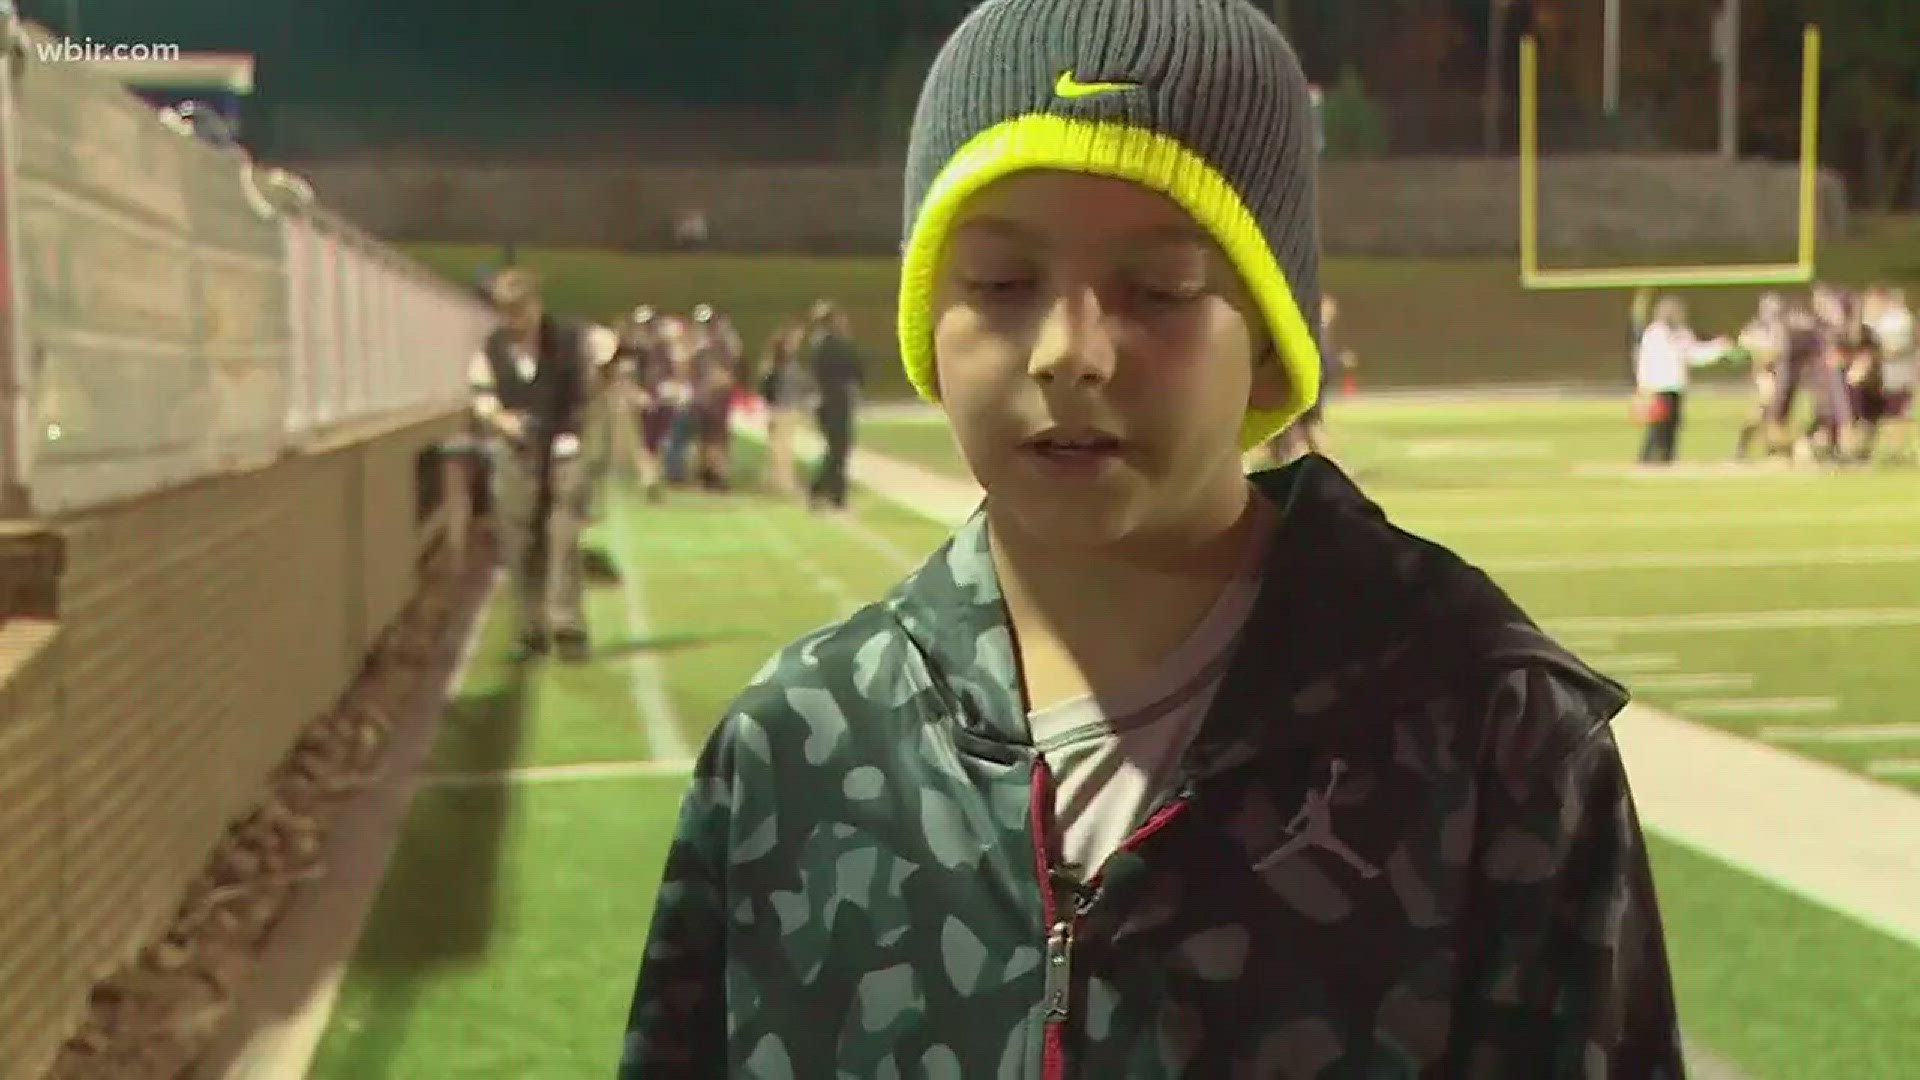 The Care 260 Program hosted football games benefiting a boy with cancer.